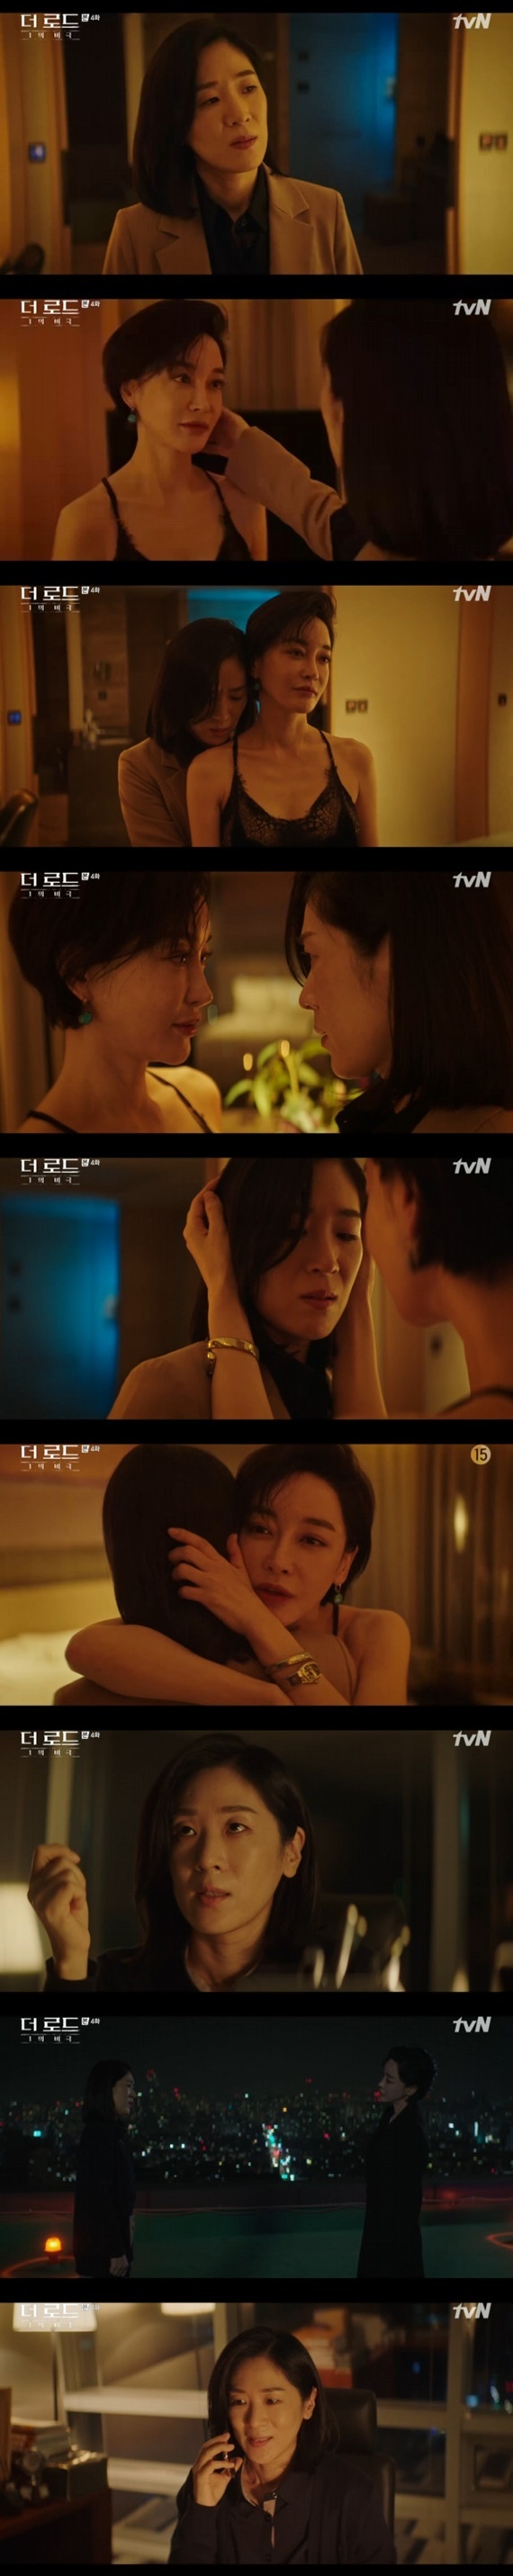 Seoul = = The Lorde: The Tragedy of 1 Kim Hye-eun used the secret of Baek Ji Won as a pretext to Blackmail – Cinémix Par Chloé.In the TVN Wednesday-Thursday evening drama The Lorde: The Tragedy of 1 (The Lorde) (playplayed by Yoon Hee-jung/directed Kim No-won), the secret relationship between Cha Seo-young (Kim Hye-eun) and Baek Ji Won was revealed.Cha Seo-young called Baek Soo-hyun (Ji Jin-hee) and Seo Eun-soo (Yoon Se-a) to the hotel room, facing each other and making them misunderstand each other.At that time, Cha stayed in the other room, and the Wifes Lies was called by Kwon Yeo-jin (Baek Ji Won), director of the press office.Cha Seo-young warned Kwon Ji-jin, Find a successor. It is not a discussion or coordination. He warned, I am worried about what more to demand.Kwon Ji-jin, who seemed to have a weakness for Cha Seo-young, added questions to the strange atmosphere with Cha Seo-young.Cha Seo-youngs brilliant appearance also assumed that Baek Soo-hyun was holding the other Wifes Lies, and was convinced that it was Kwons weakness.The Wifes Lies prime time zone was on the air.So, Baek Soo-hyun investigated Kwon Yeo-jin and found out that Kwon Yeo-jin had invaded his study by receiving a master key from Hwang Tae-seop (Kim Roe-ha).Unsettled by the pressure of Baek Soo-hyun, Kwon asked Cha Seo-young about how far Baek Soo-hyun knew, but Cha Seo-young asked Kwon Yeo-jin and his relationship video again.Kwon Seo-young, who draws a line to the business relationship, shouted, I was sincere to you, but Cha Seo-young said, Did you really give me the place?After that, Kwon Ji-jin, who was suffering, was informed of the final candidate of Cheong Wa Dae spokesman.On the other hand, tvN Wednesday-Thursday evening drama The Lorde: 1 Tragedy is a mystery drama depicting a story of a terrible and tragic event that was pouring down heavy rains and a story of Secret like silence, avoidance, and threads that create another tragedy.